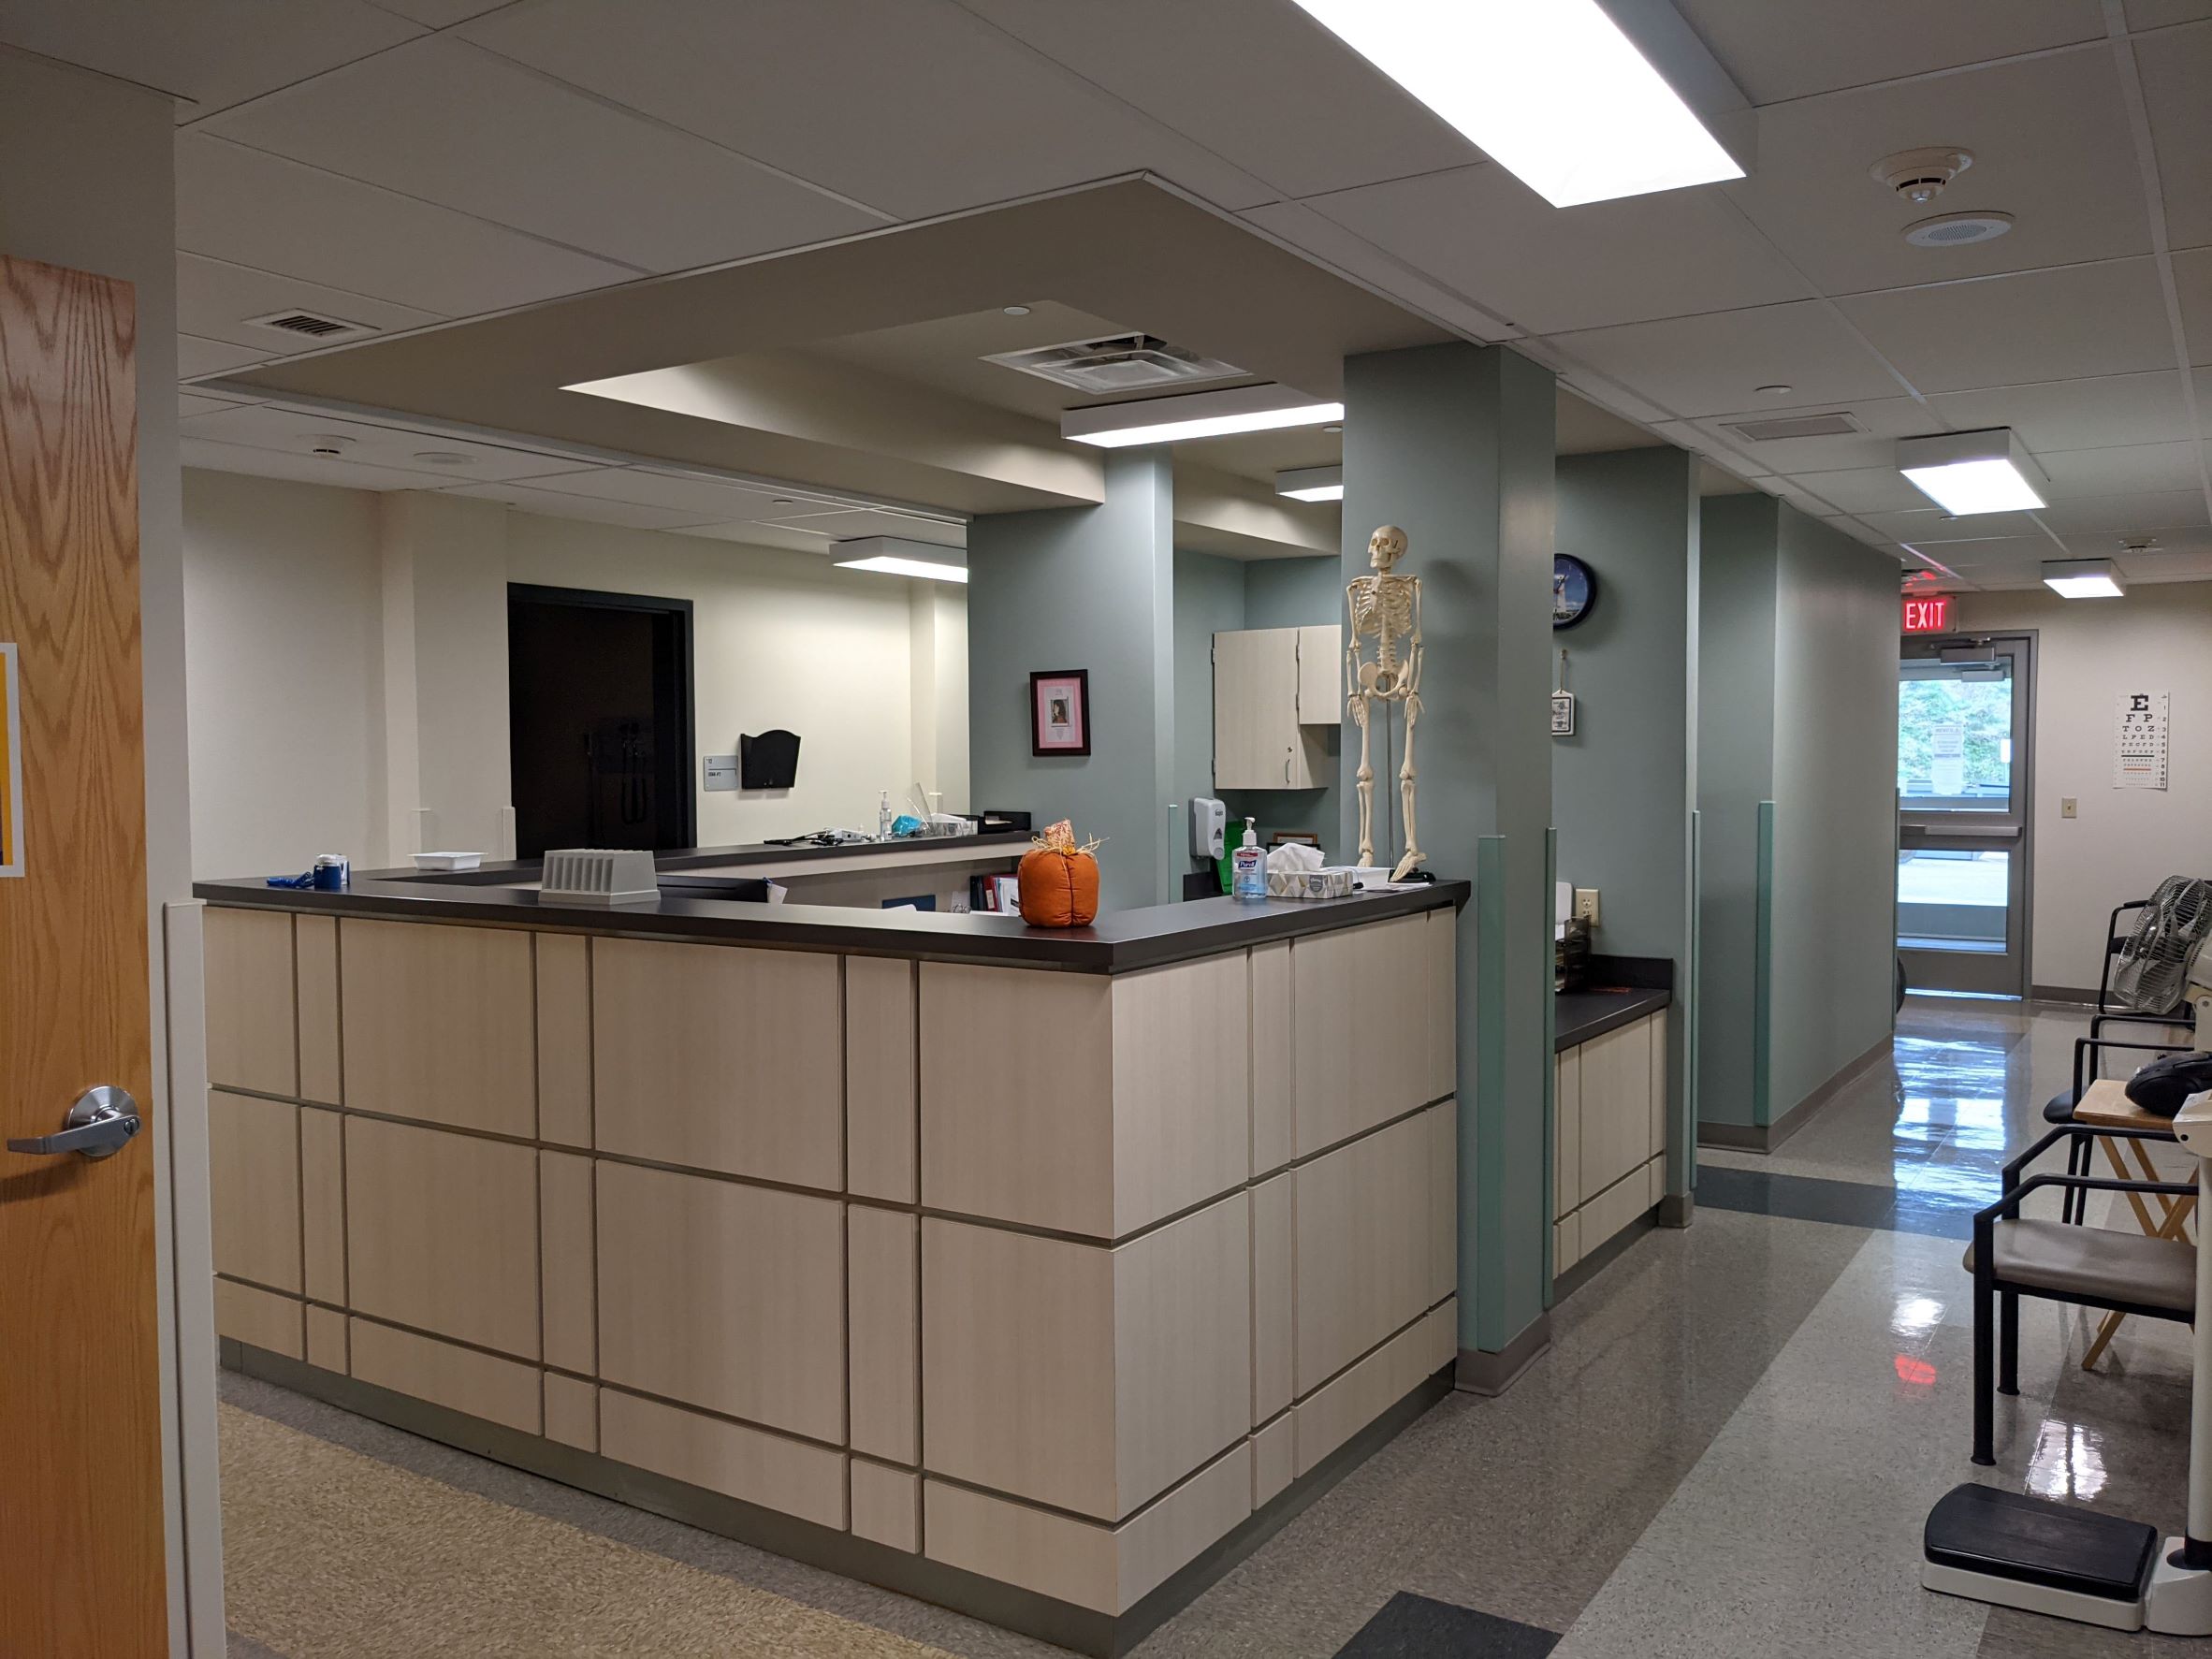 Nurses offices with vinyl floor tiles, sage green walls and columns, natural wood contemporary grided desk and ceiling tiles with tan bulkhead